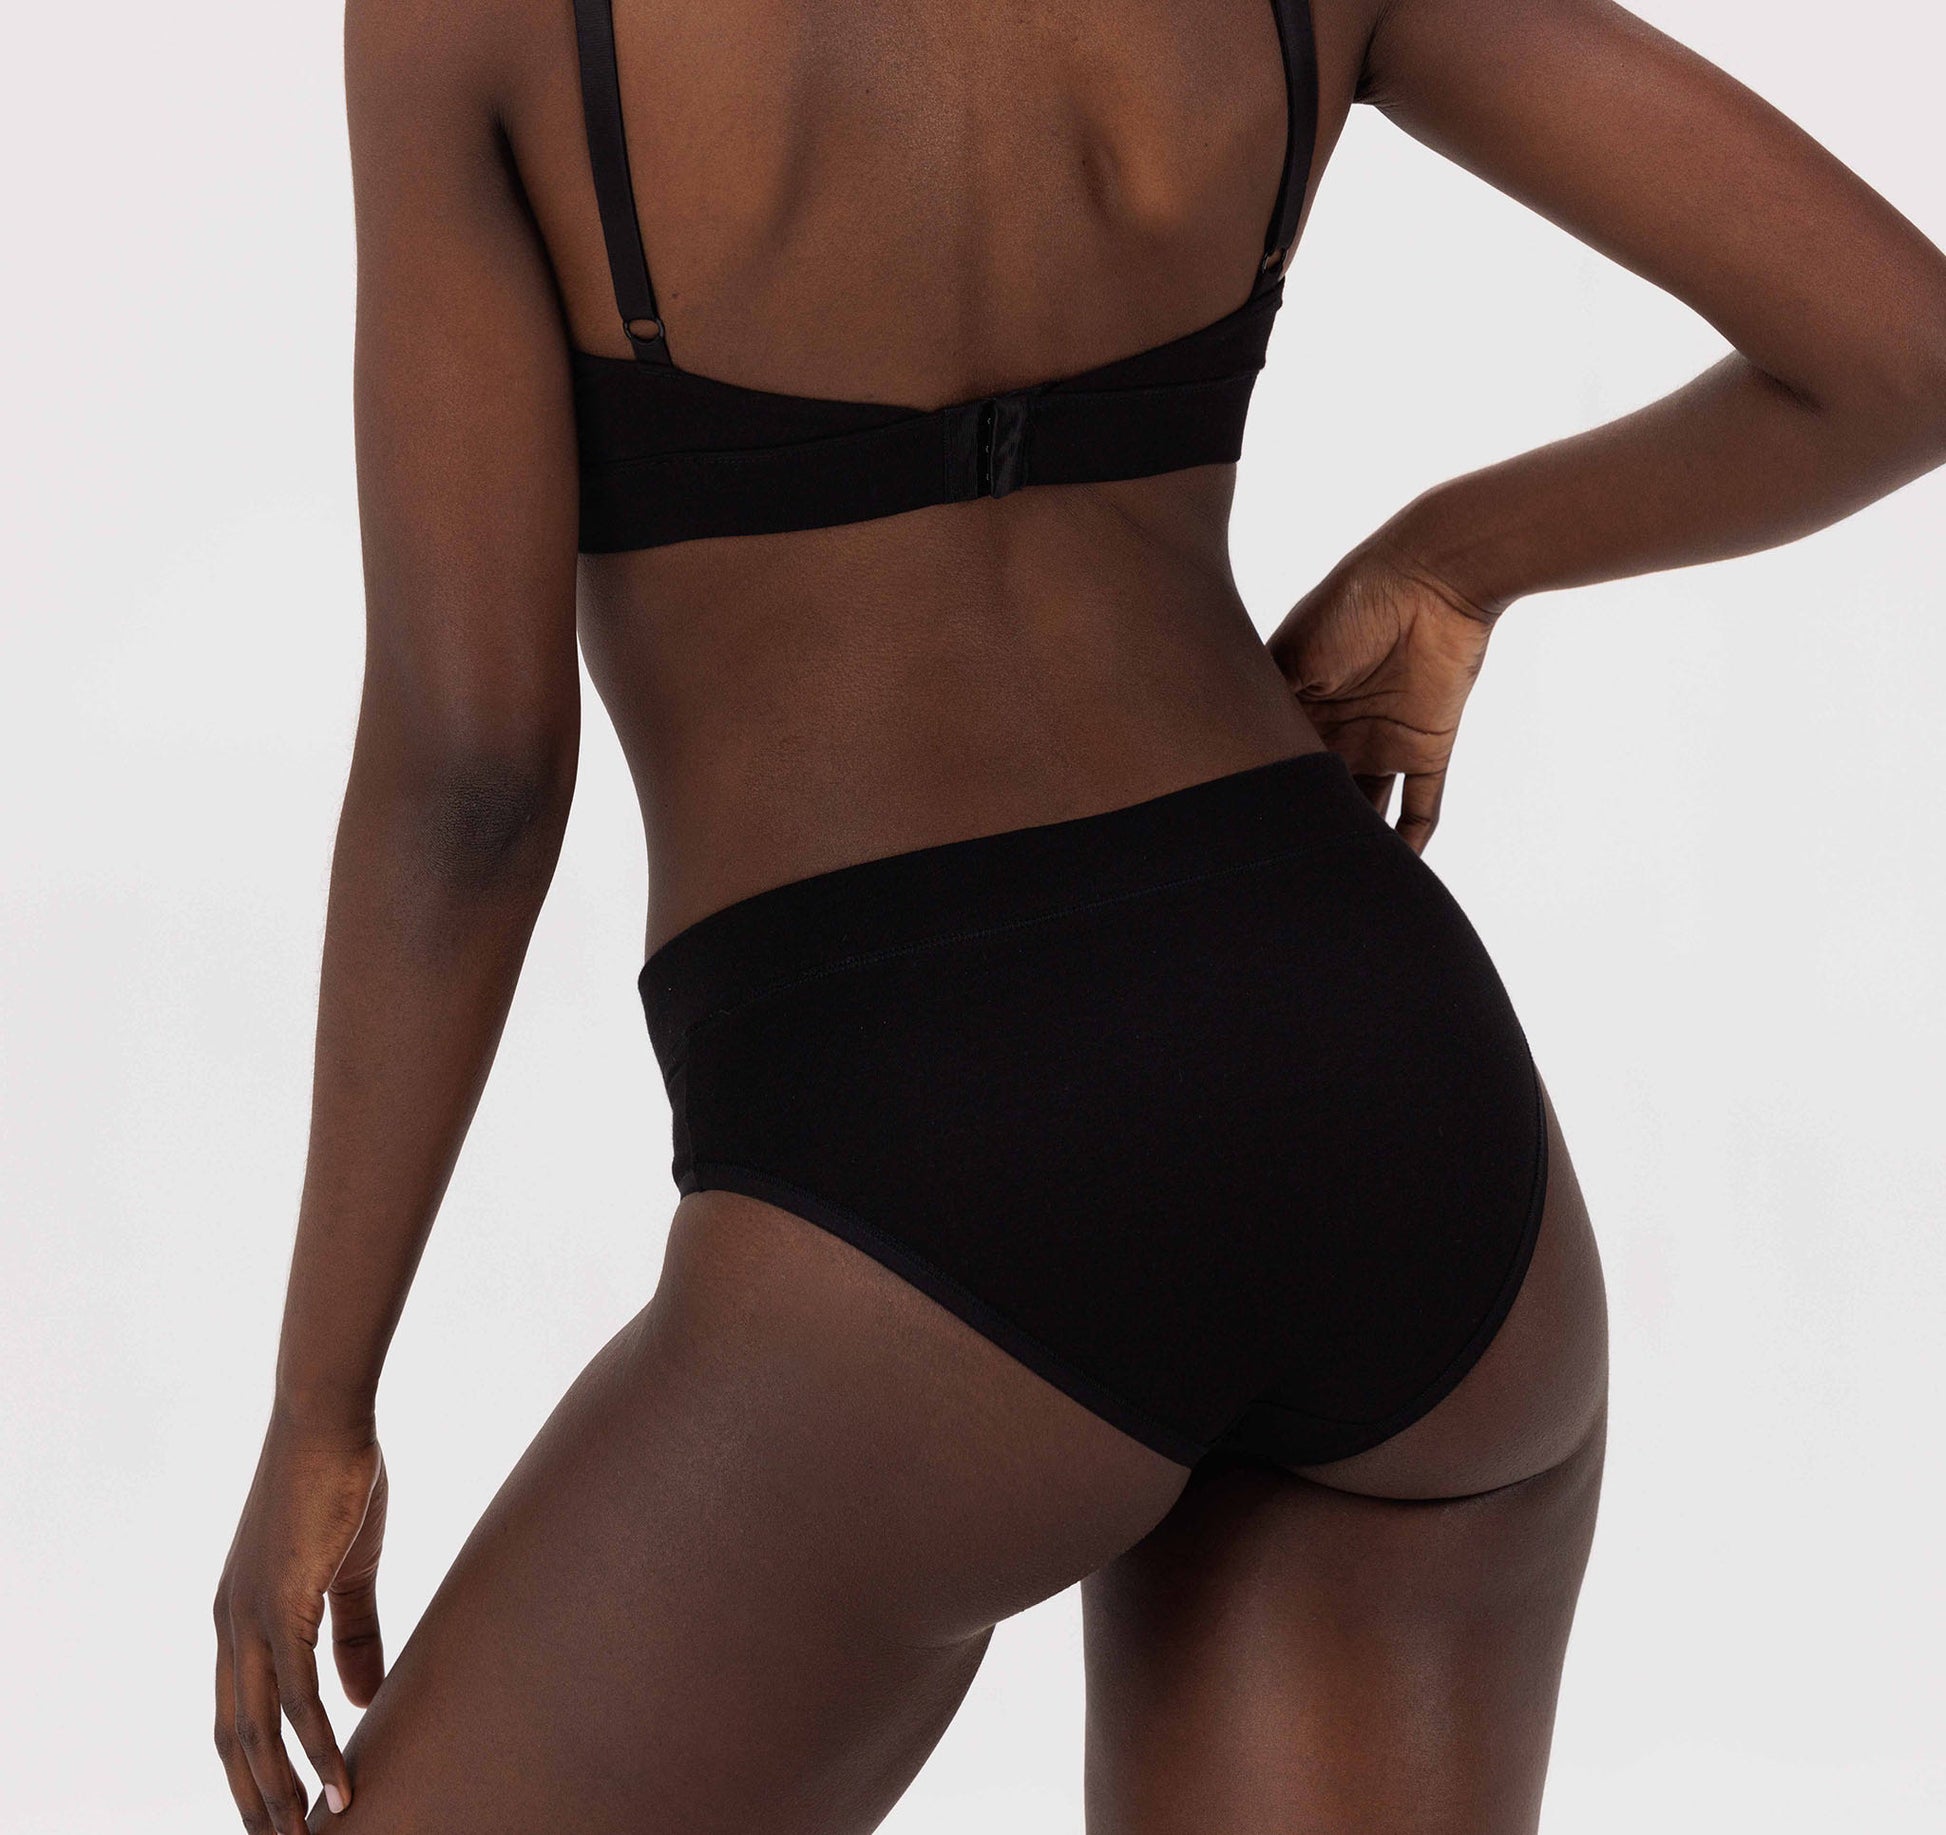 Black Clouds Undies — Organic Clothing Made in Detroit, USA